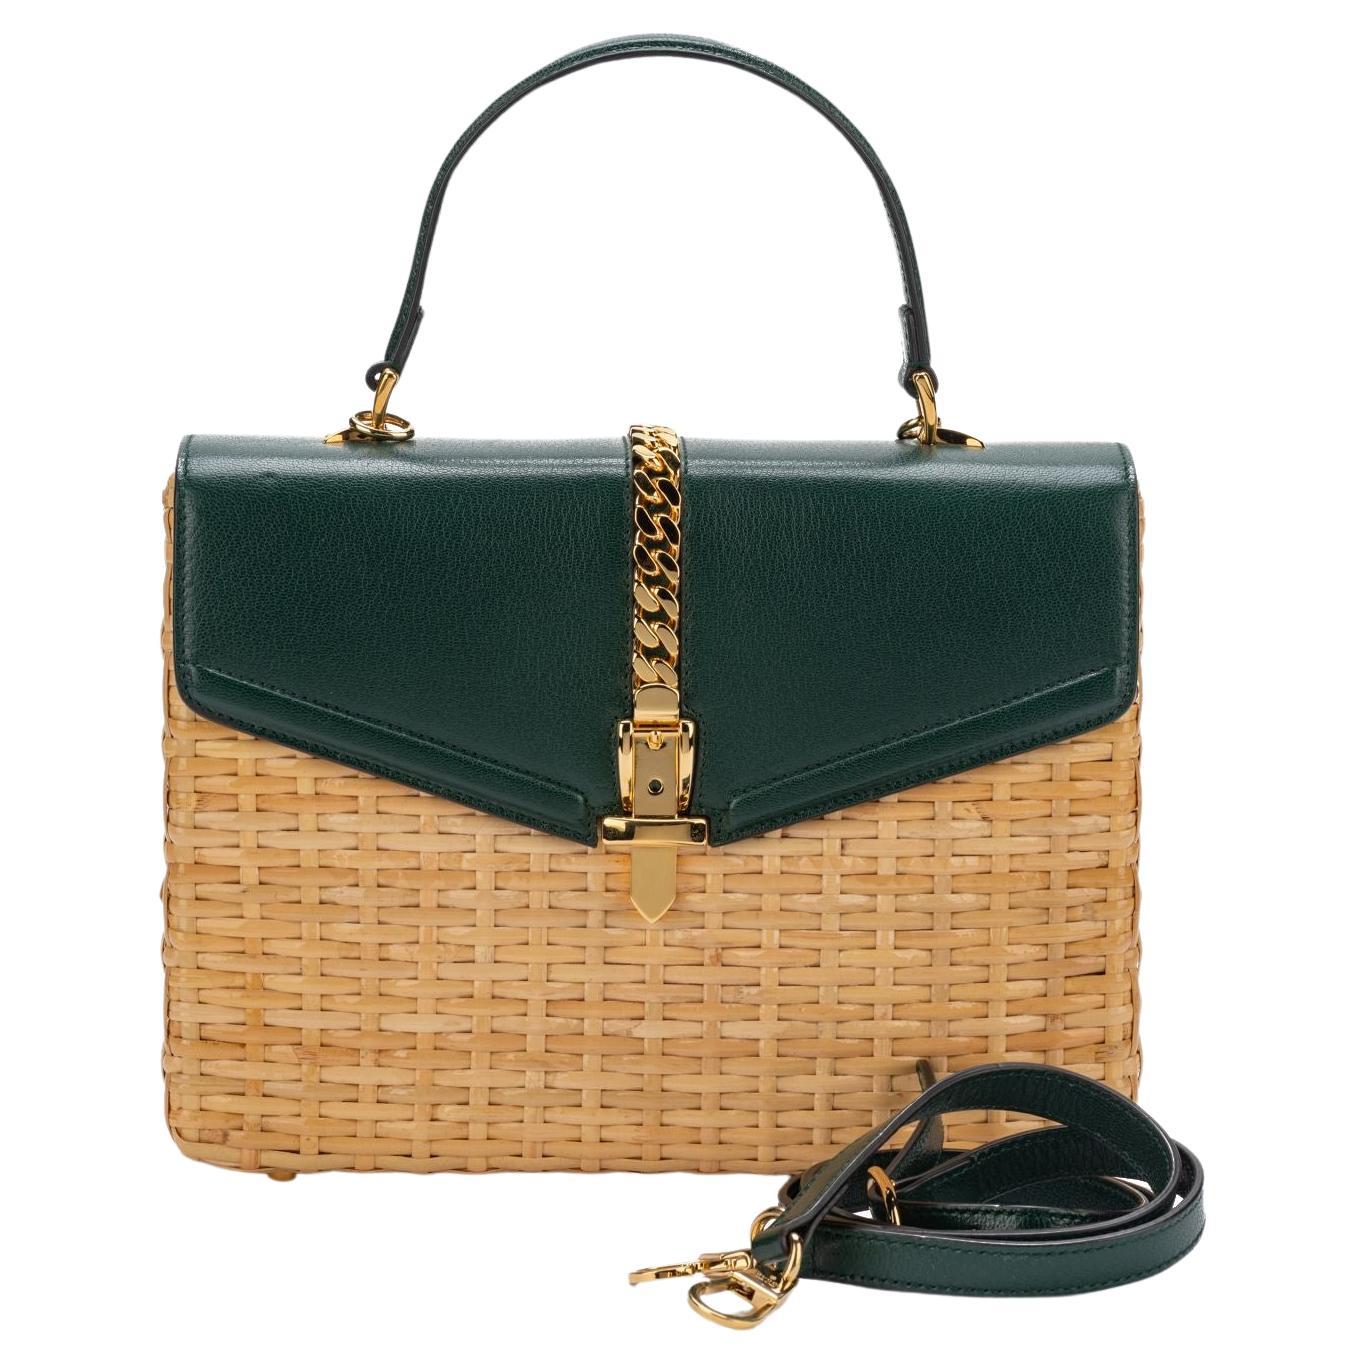 Gucci Green Leather Wicker Bag New For Sale